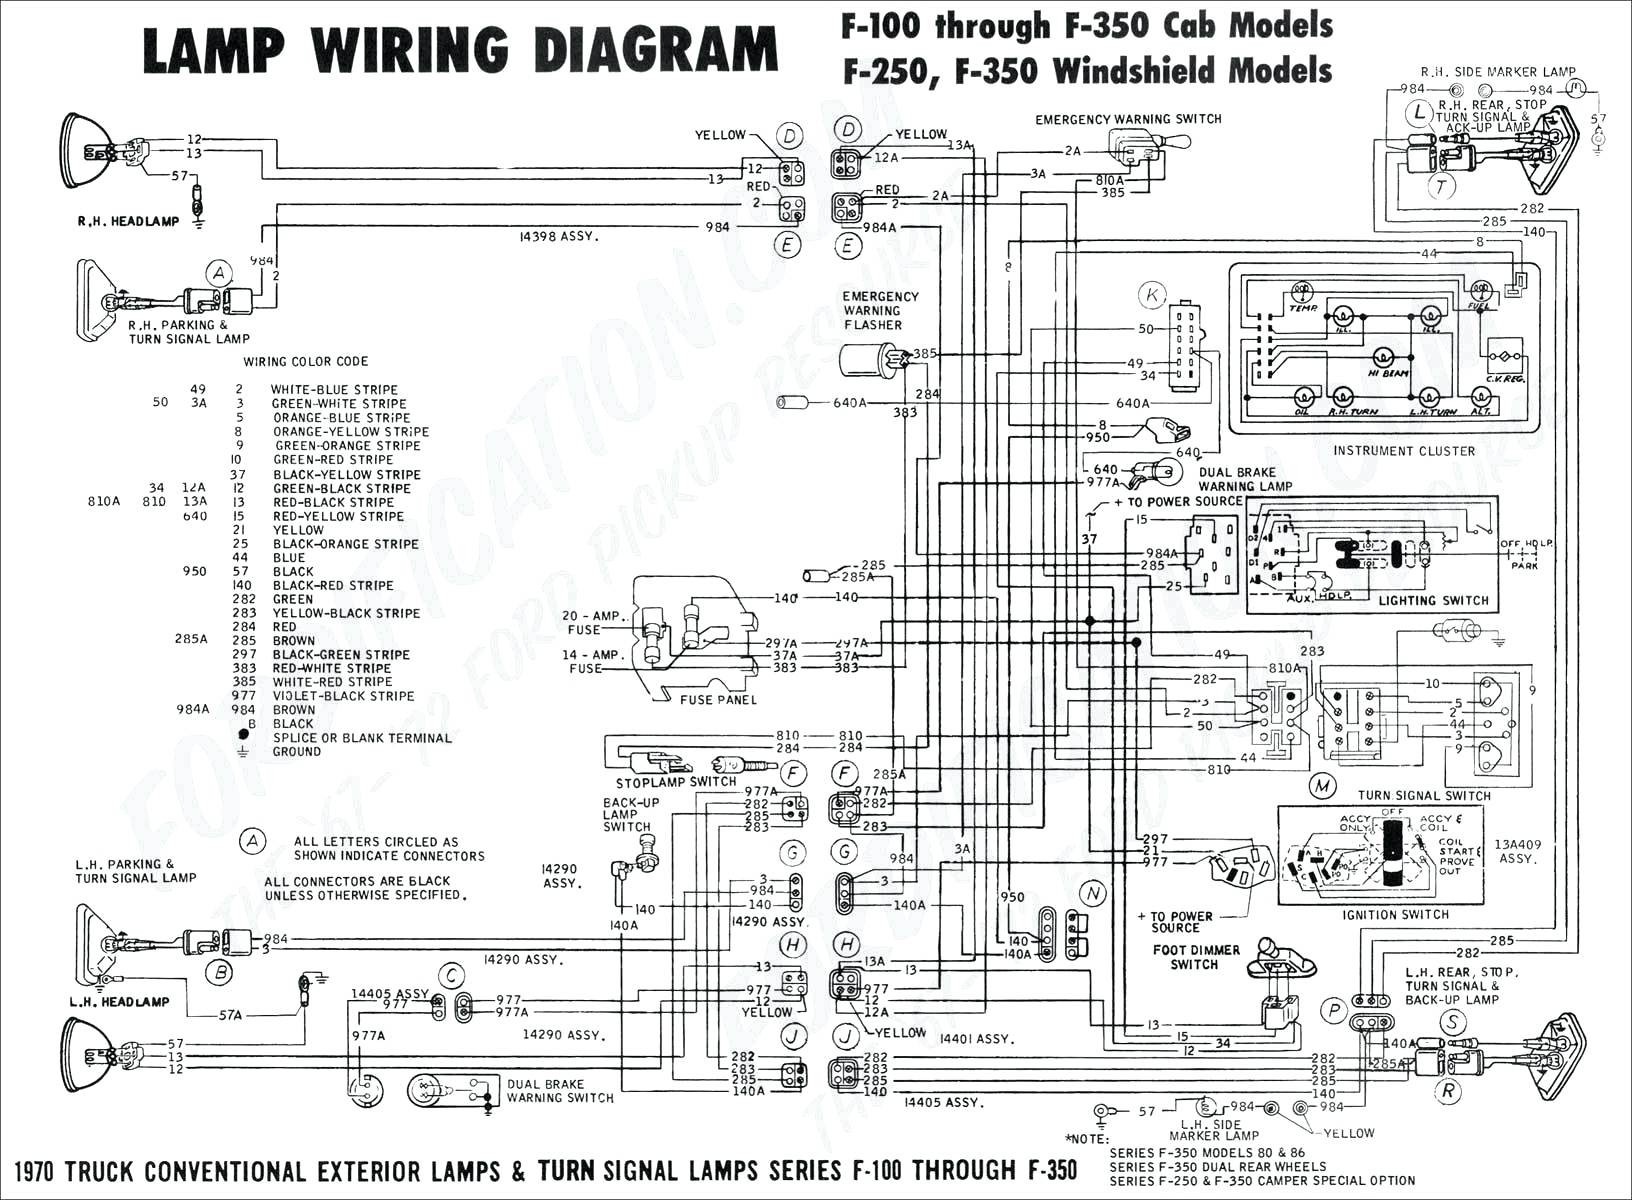 2000 Jeep Grand Cherokee Trailer Wiring Diagram New 2000 Ford Mustang Stereo Wiring Diagram Autos Weblog Wire Center